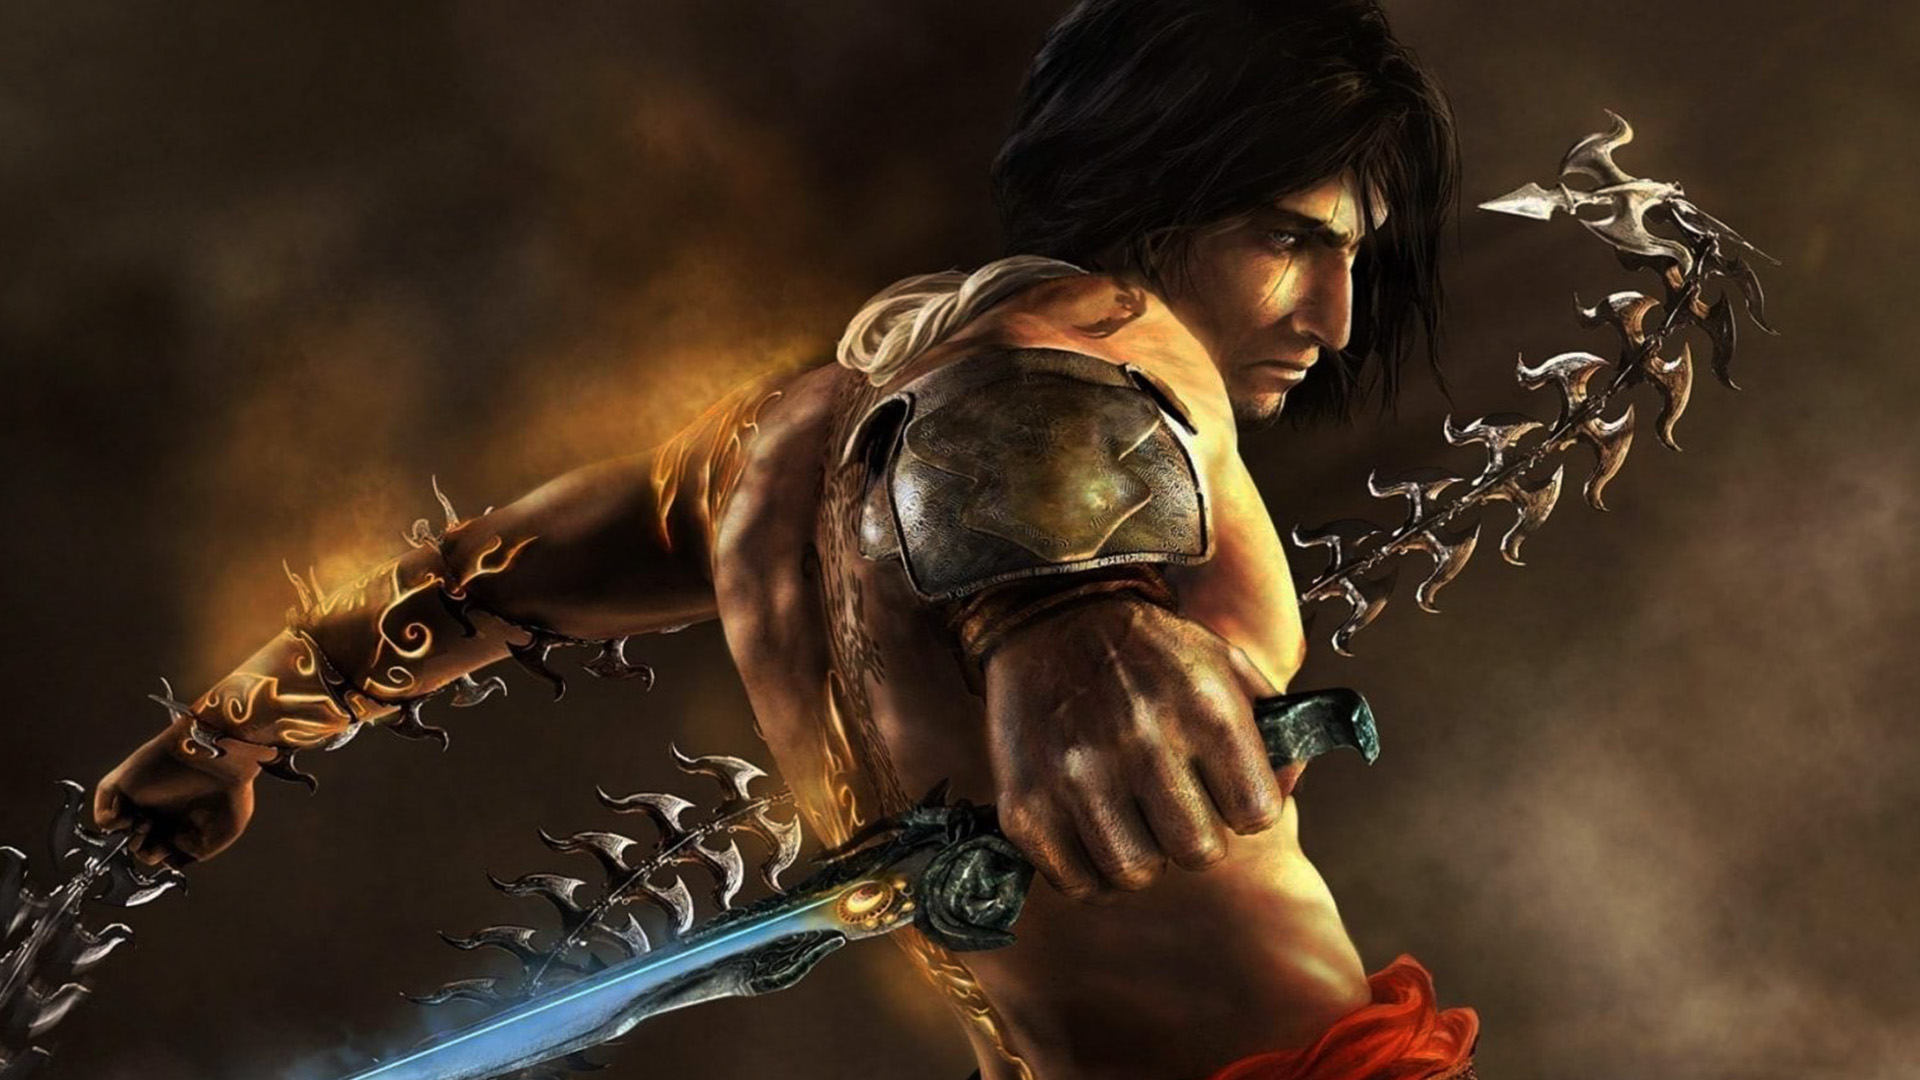 Prince of Persia The Lost Crown - Reveal Commented Gameplay